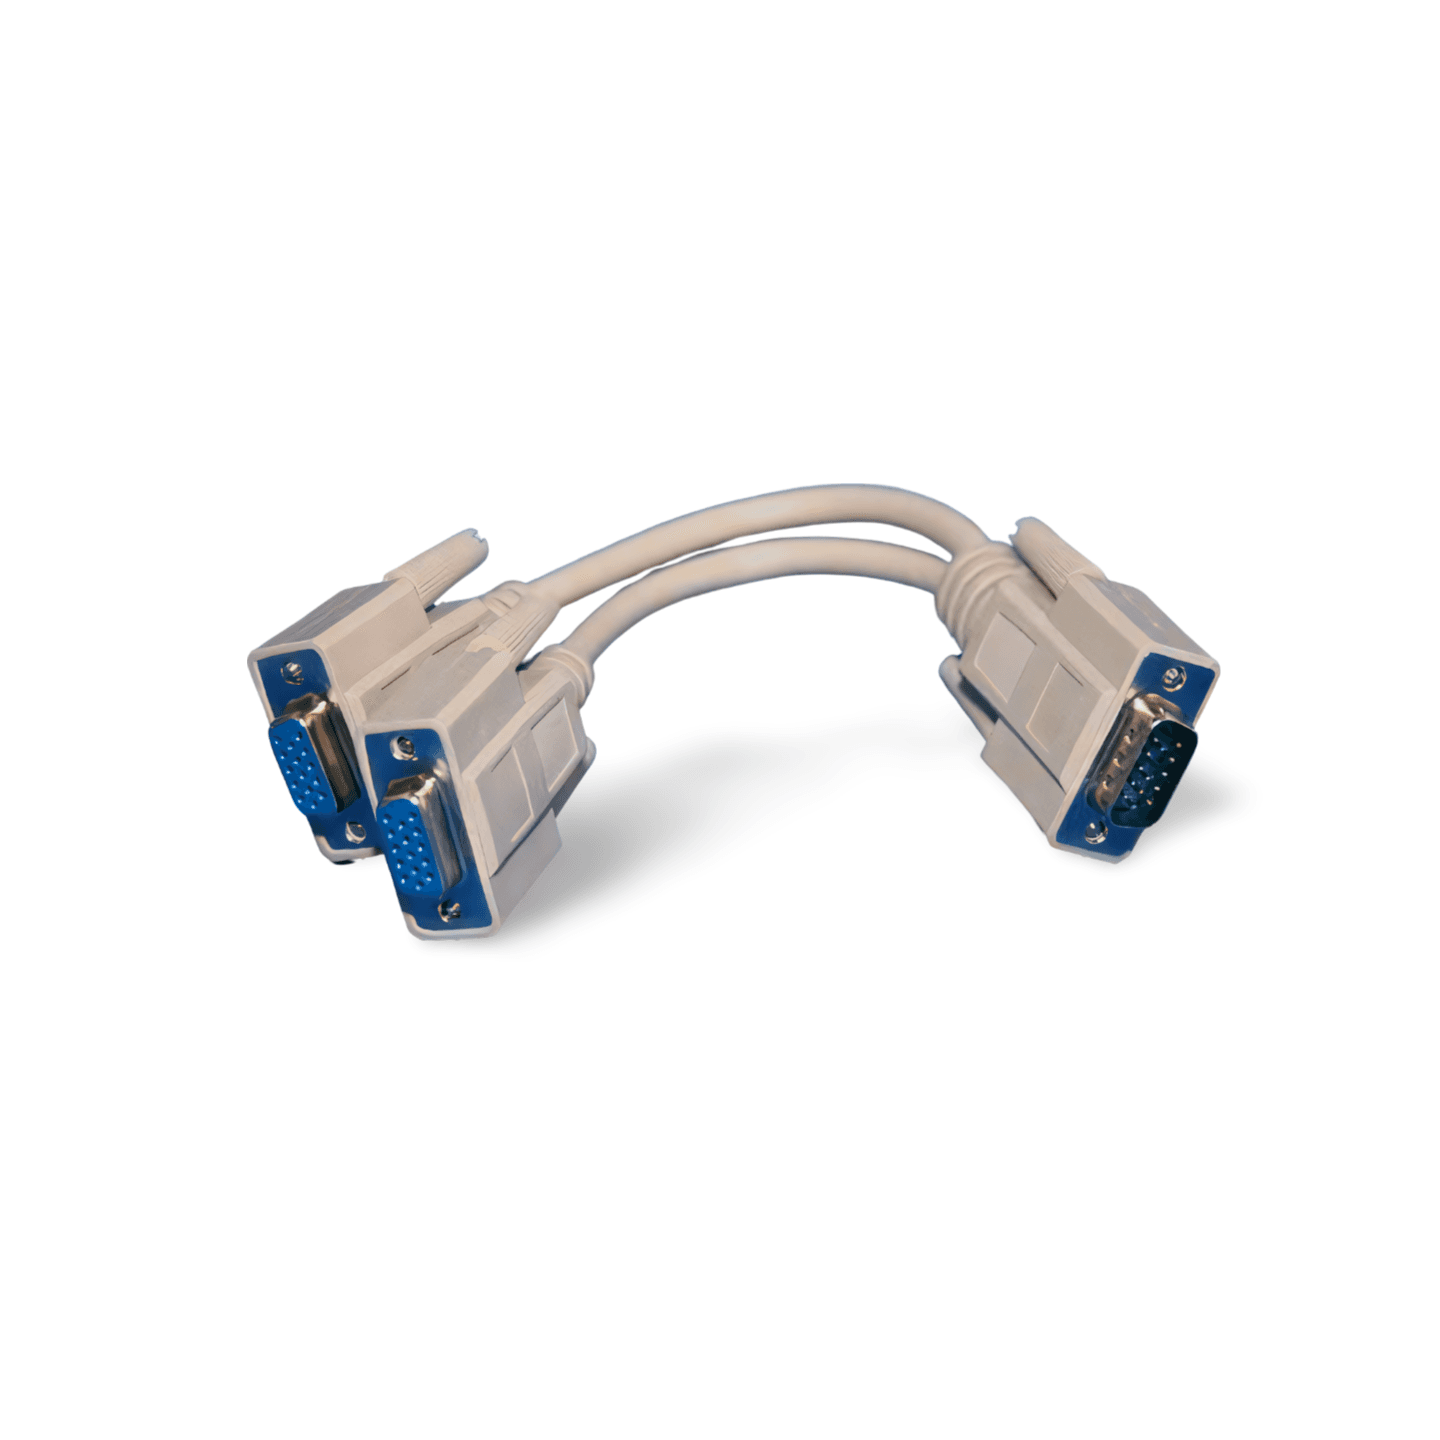 6in VGA Port to 2 Monitor VGA Splitter Cable HD15 1 Male to 2 Female beige